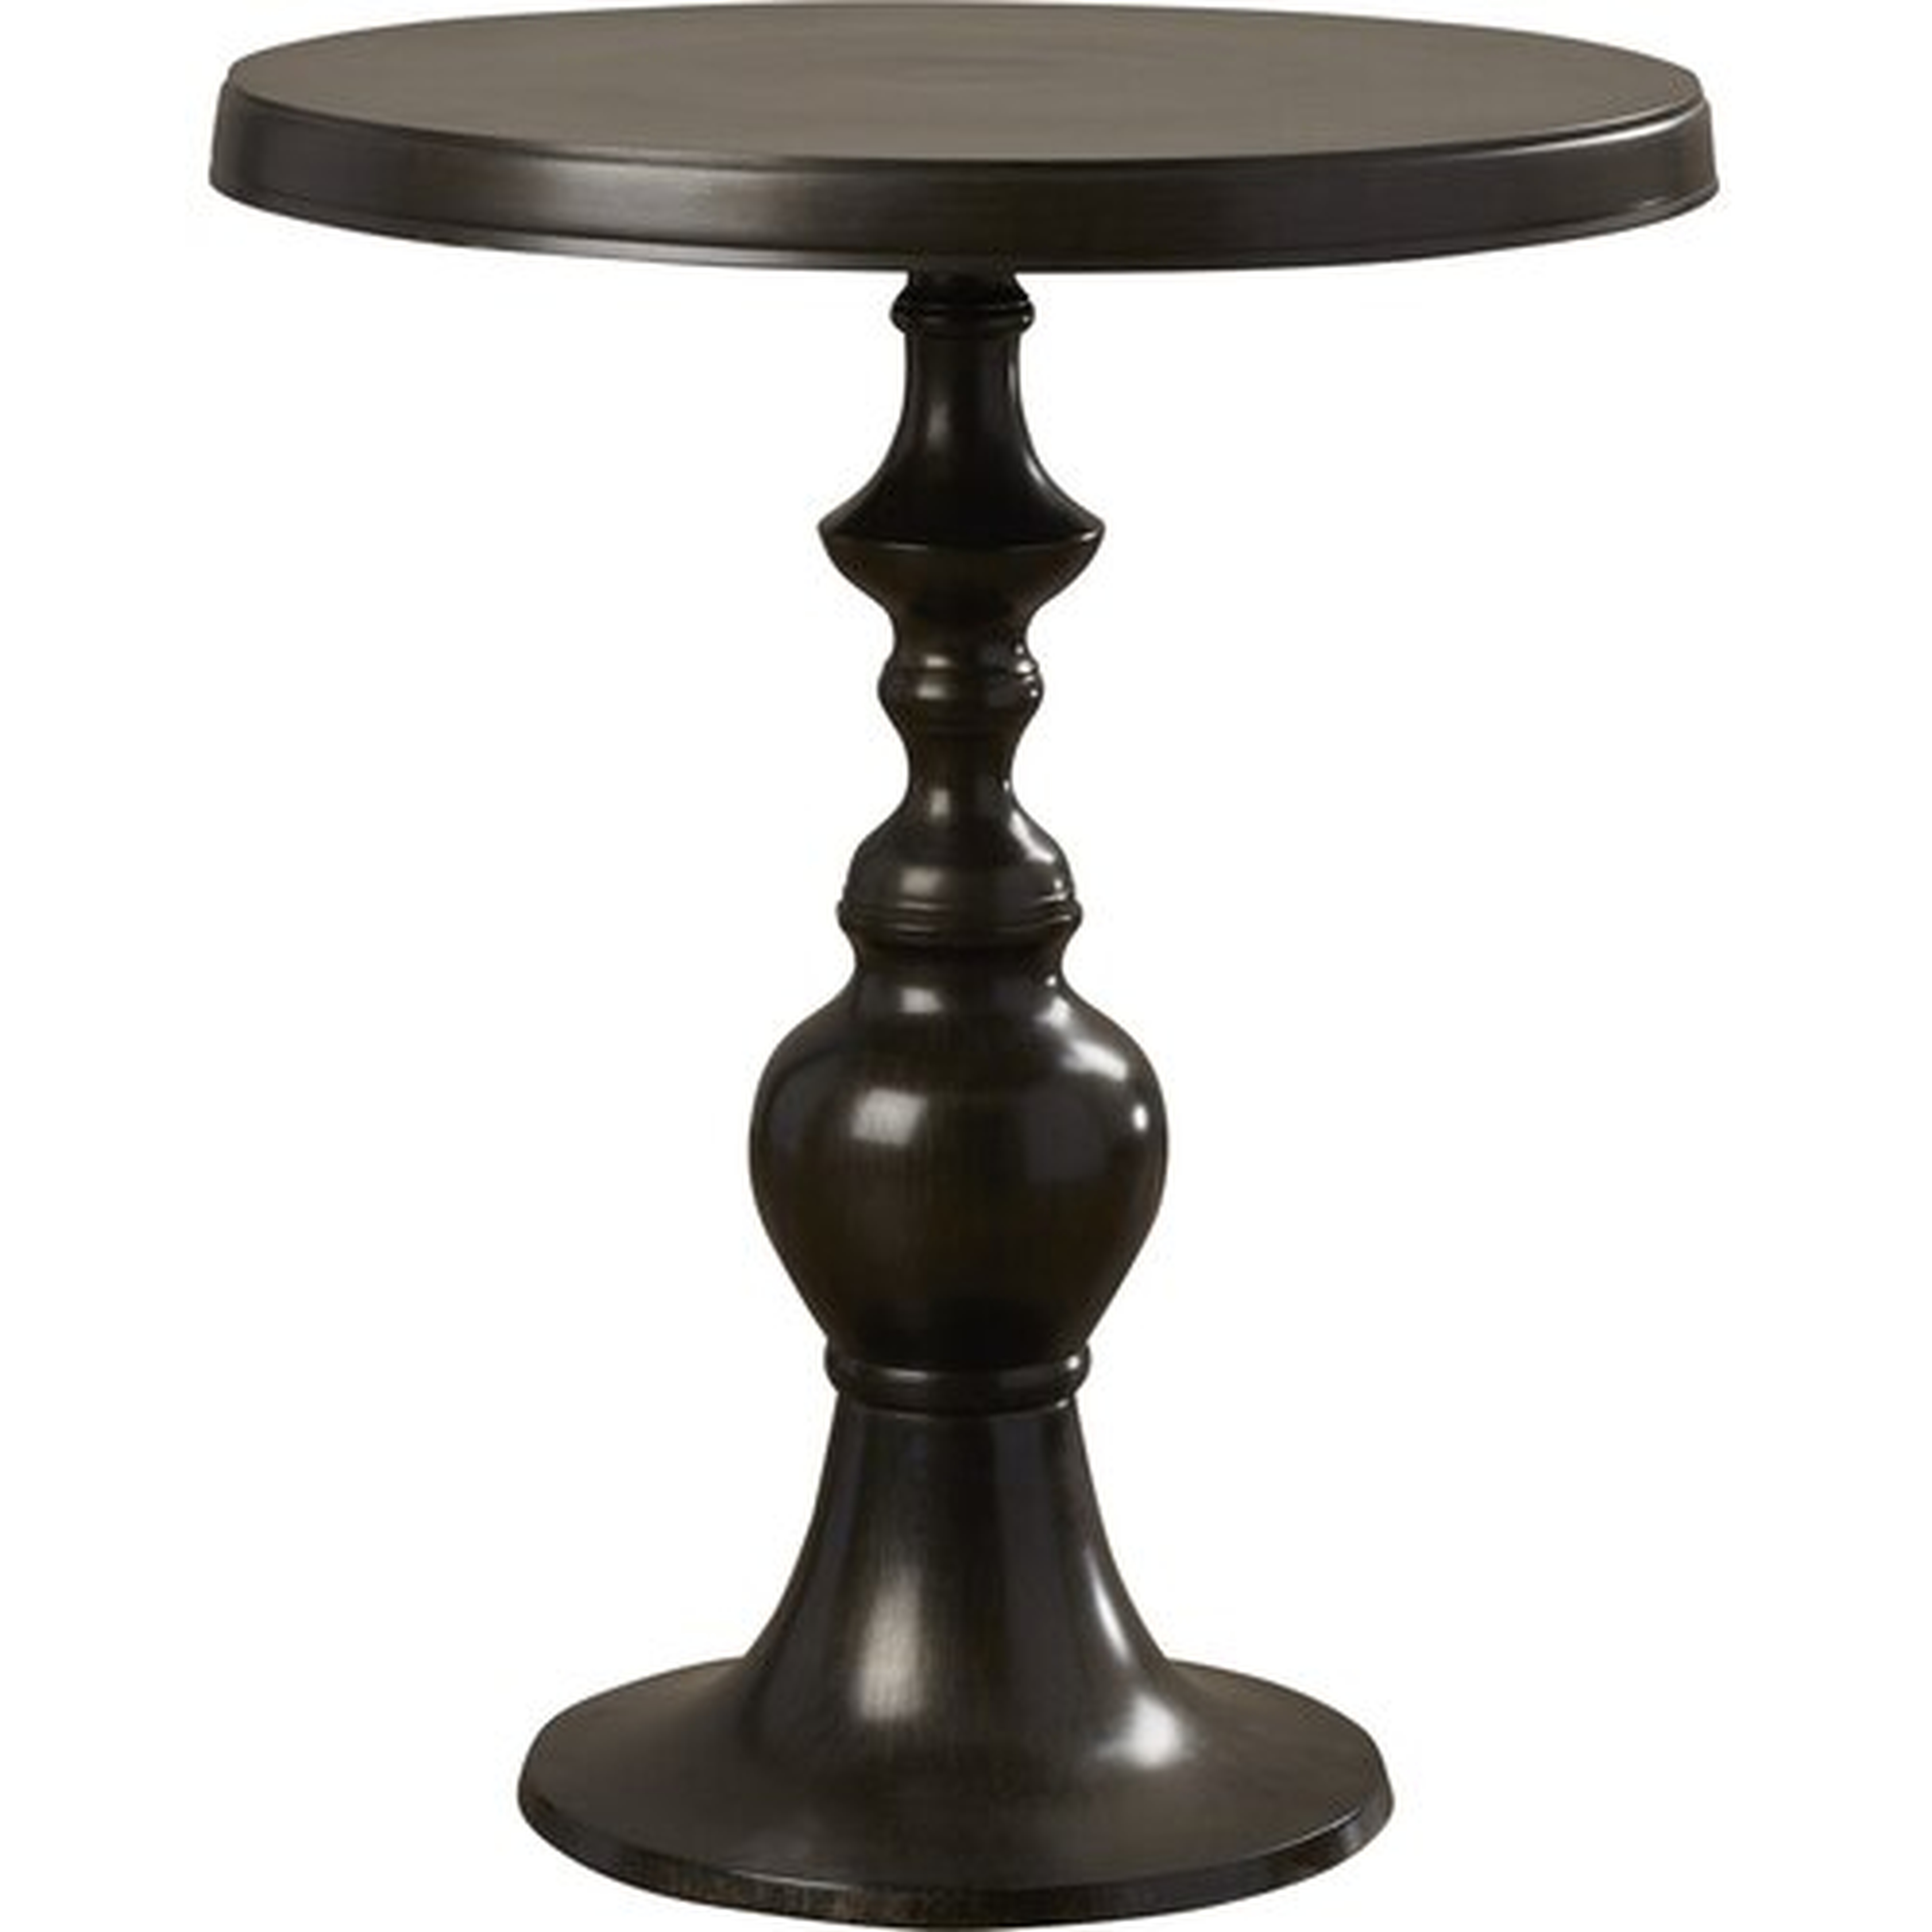 New-Beggin-by-the-Sea End Table - Wayfair